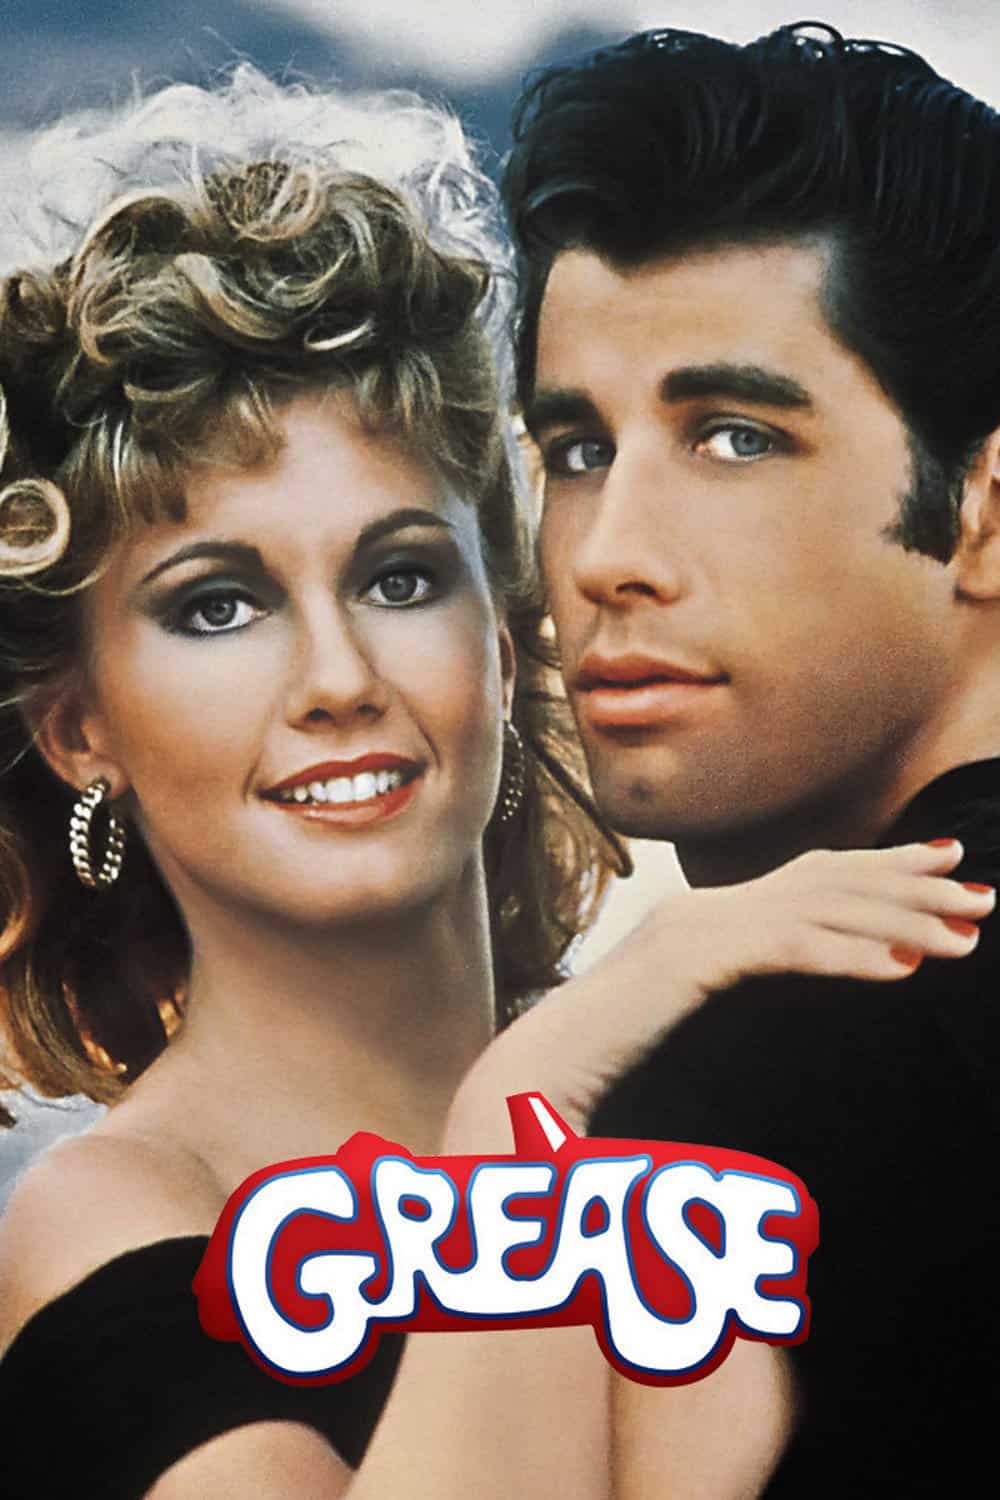 Grease, 1978 